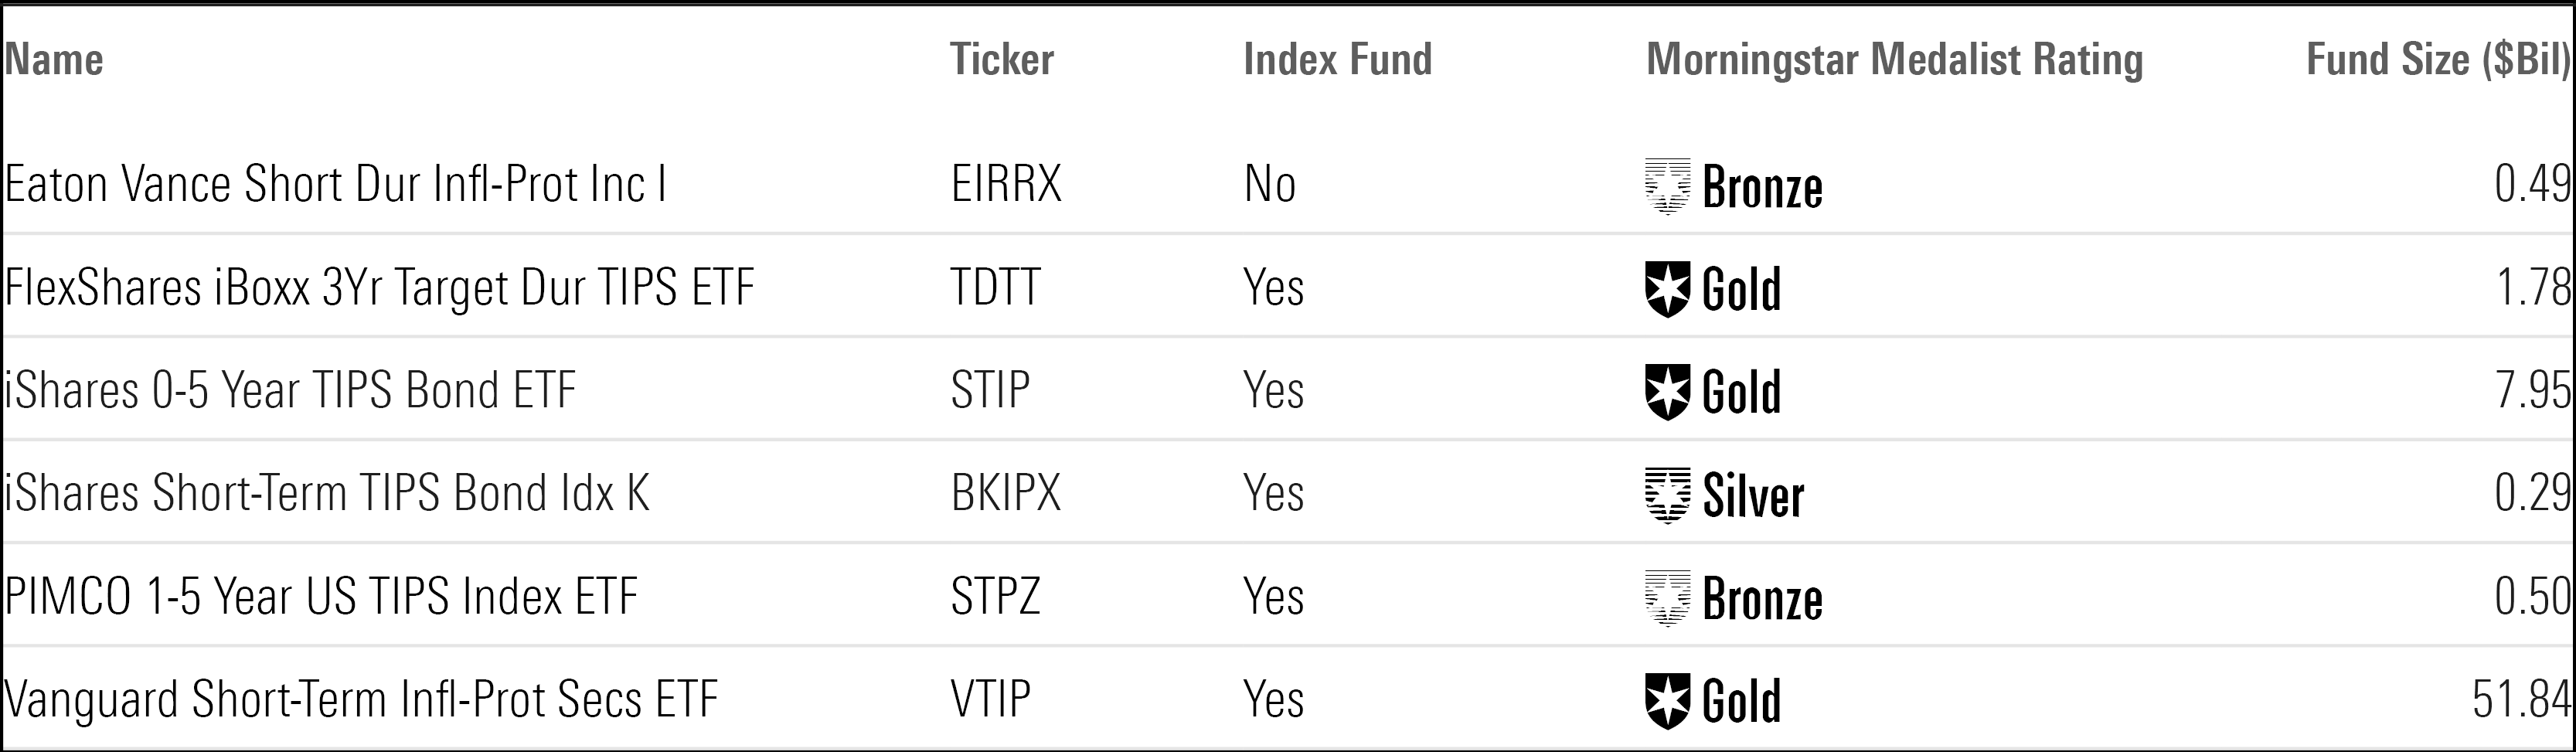 6 Top performing TIPS Funds.